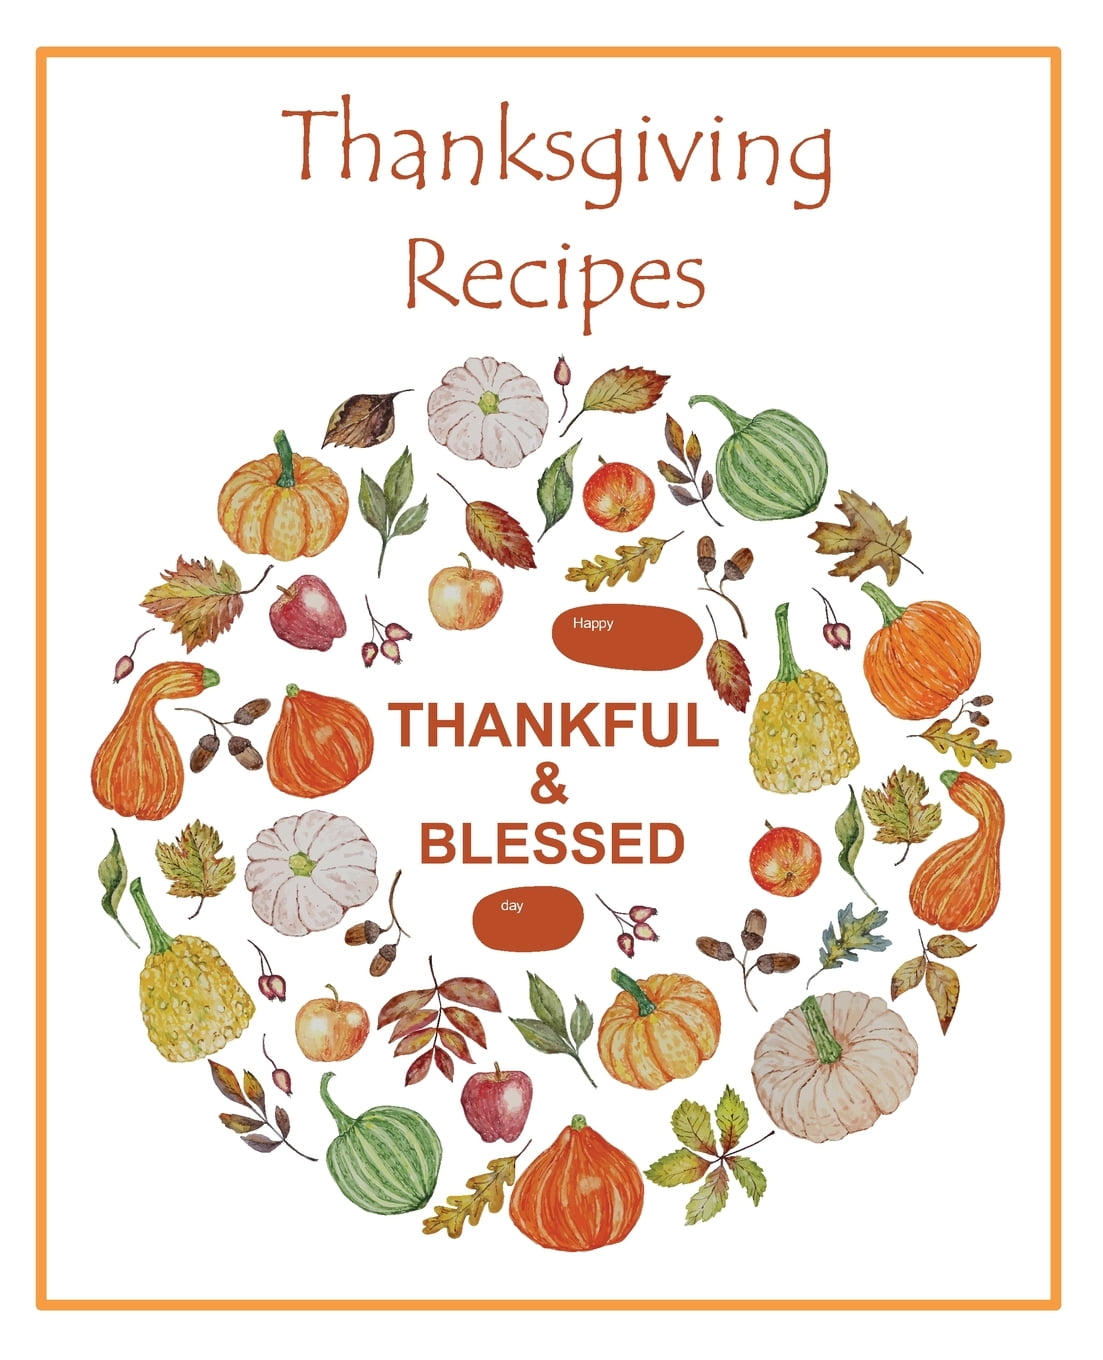 Thanksgiving Original Family Recipes Book: Happy Thanksgiving Holiday  Themed Custom Structured Recipe Cookbook For Families to Write Your Grandma  Reci (Paperback)